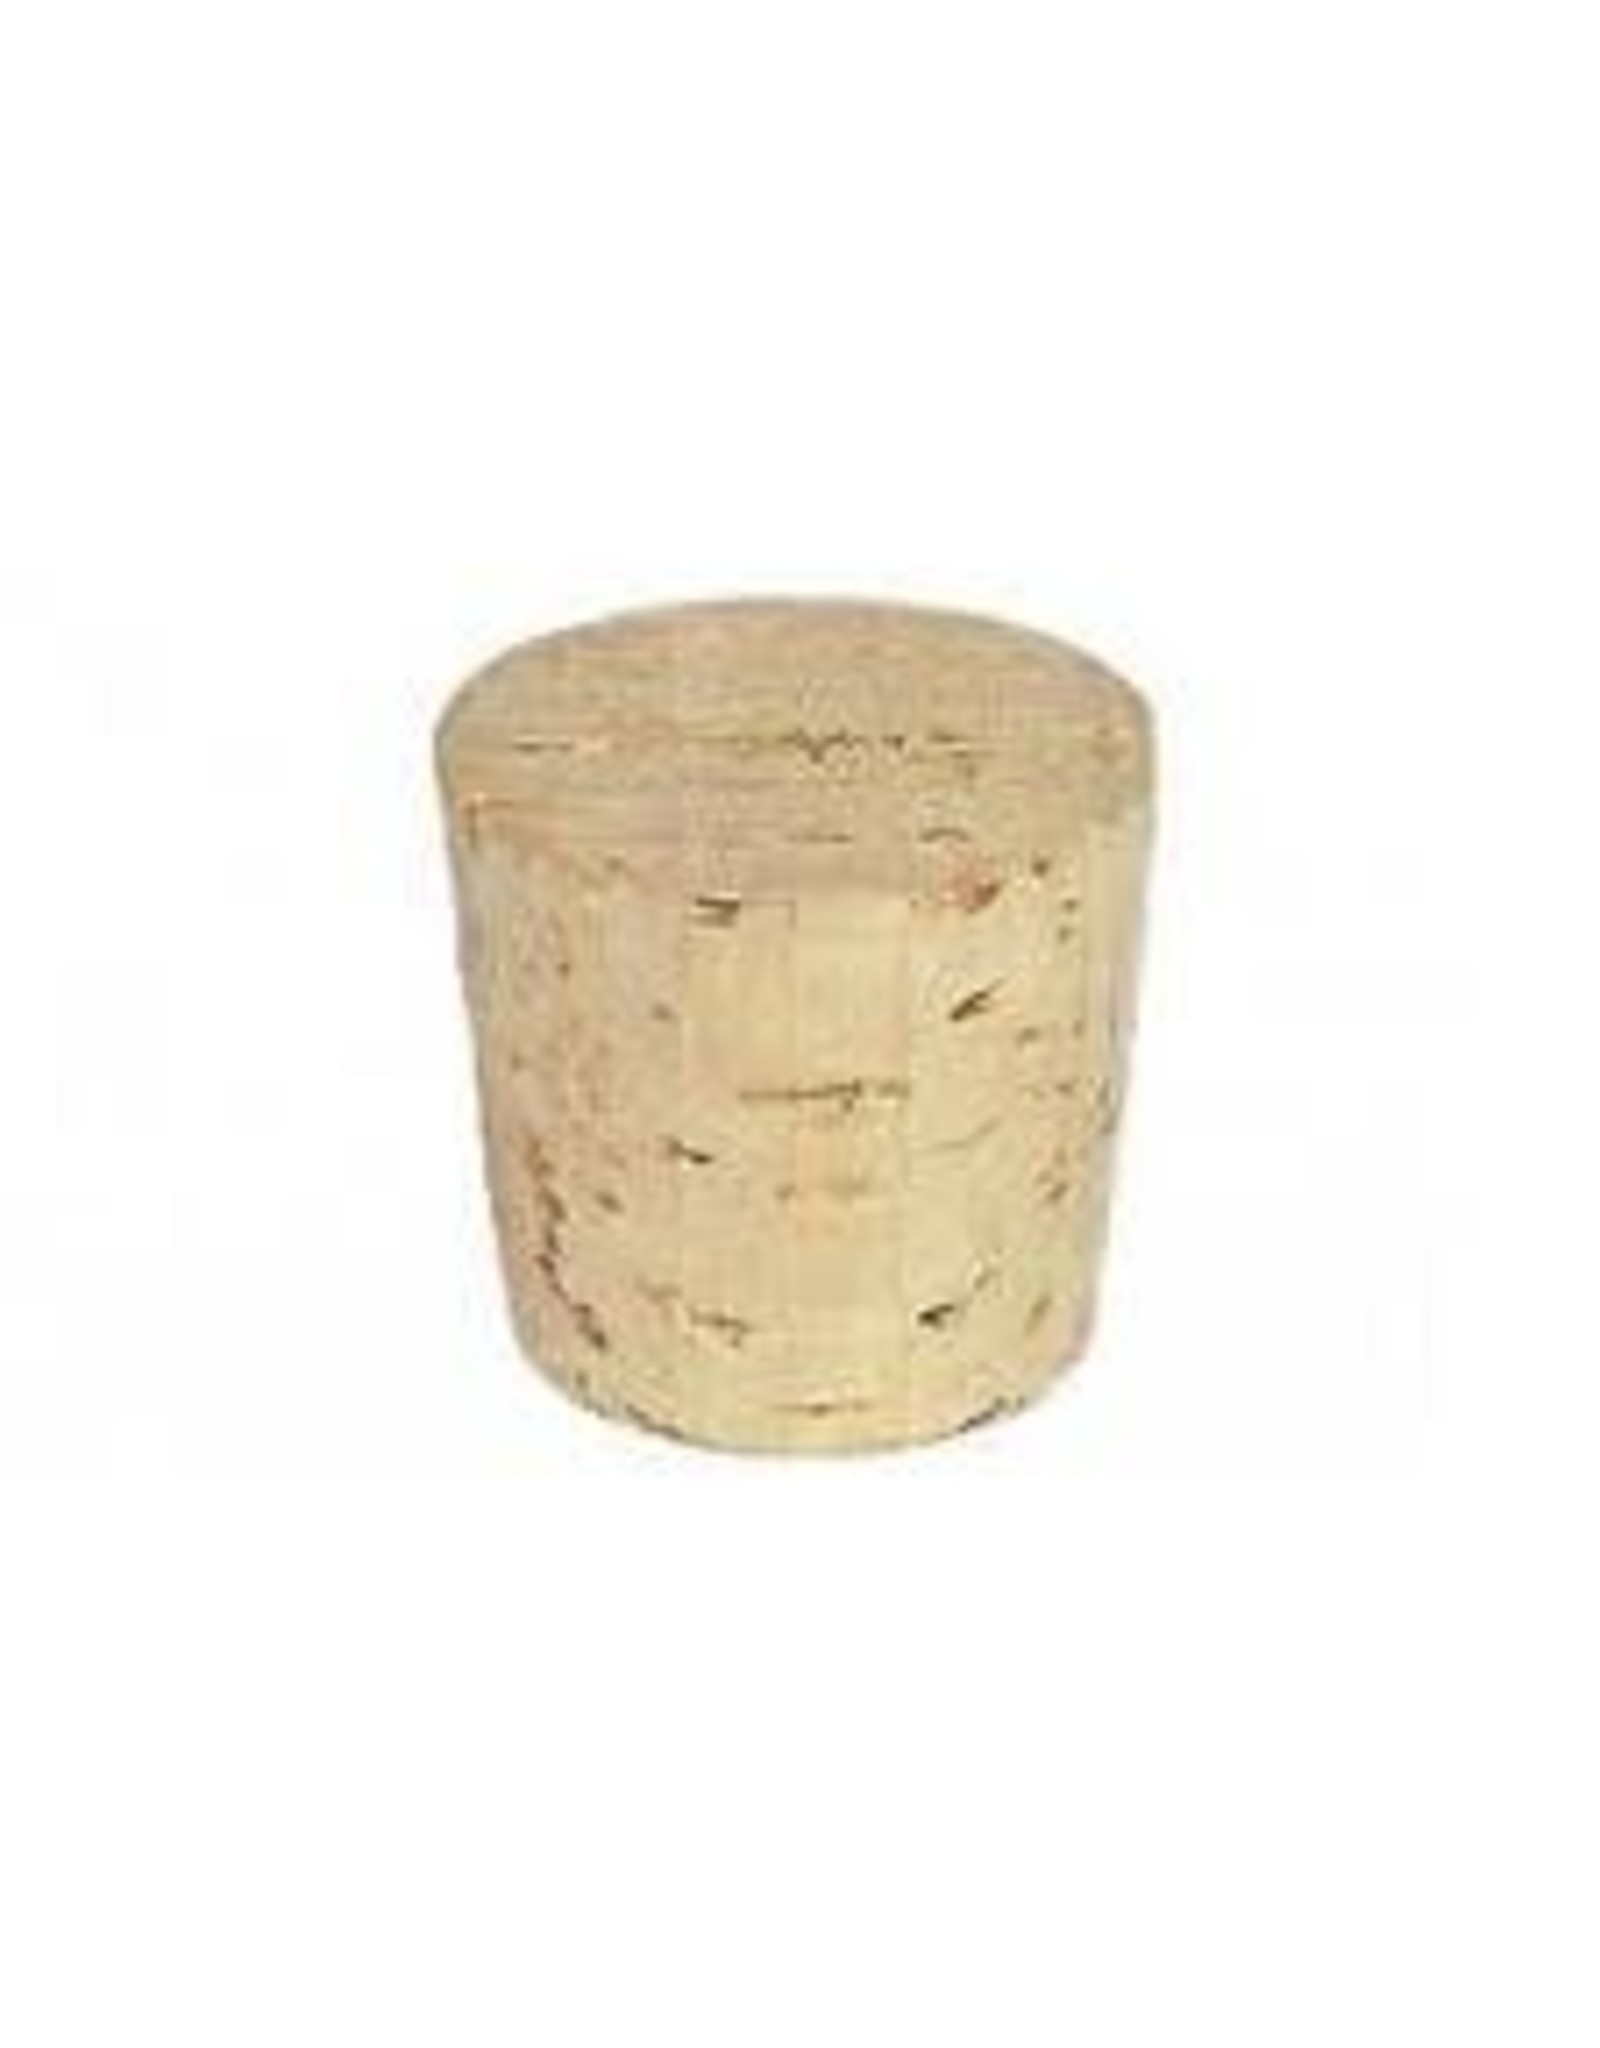 #14 TAPERED CORK FOR 1 GALLON JUG